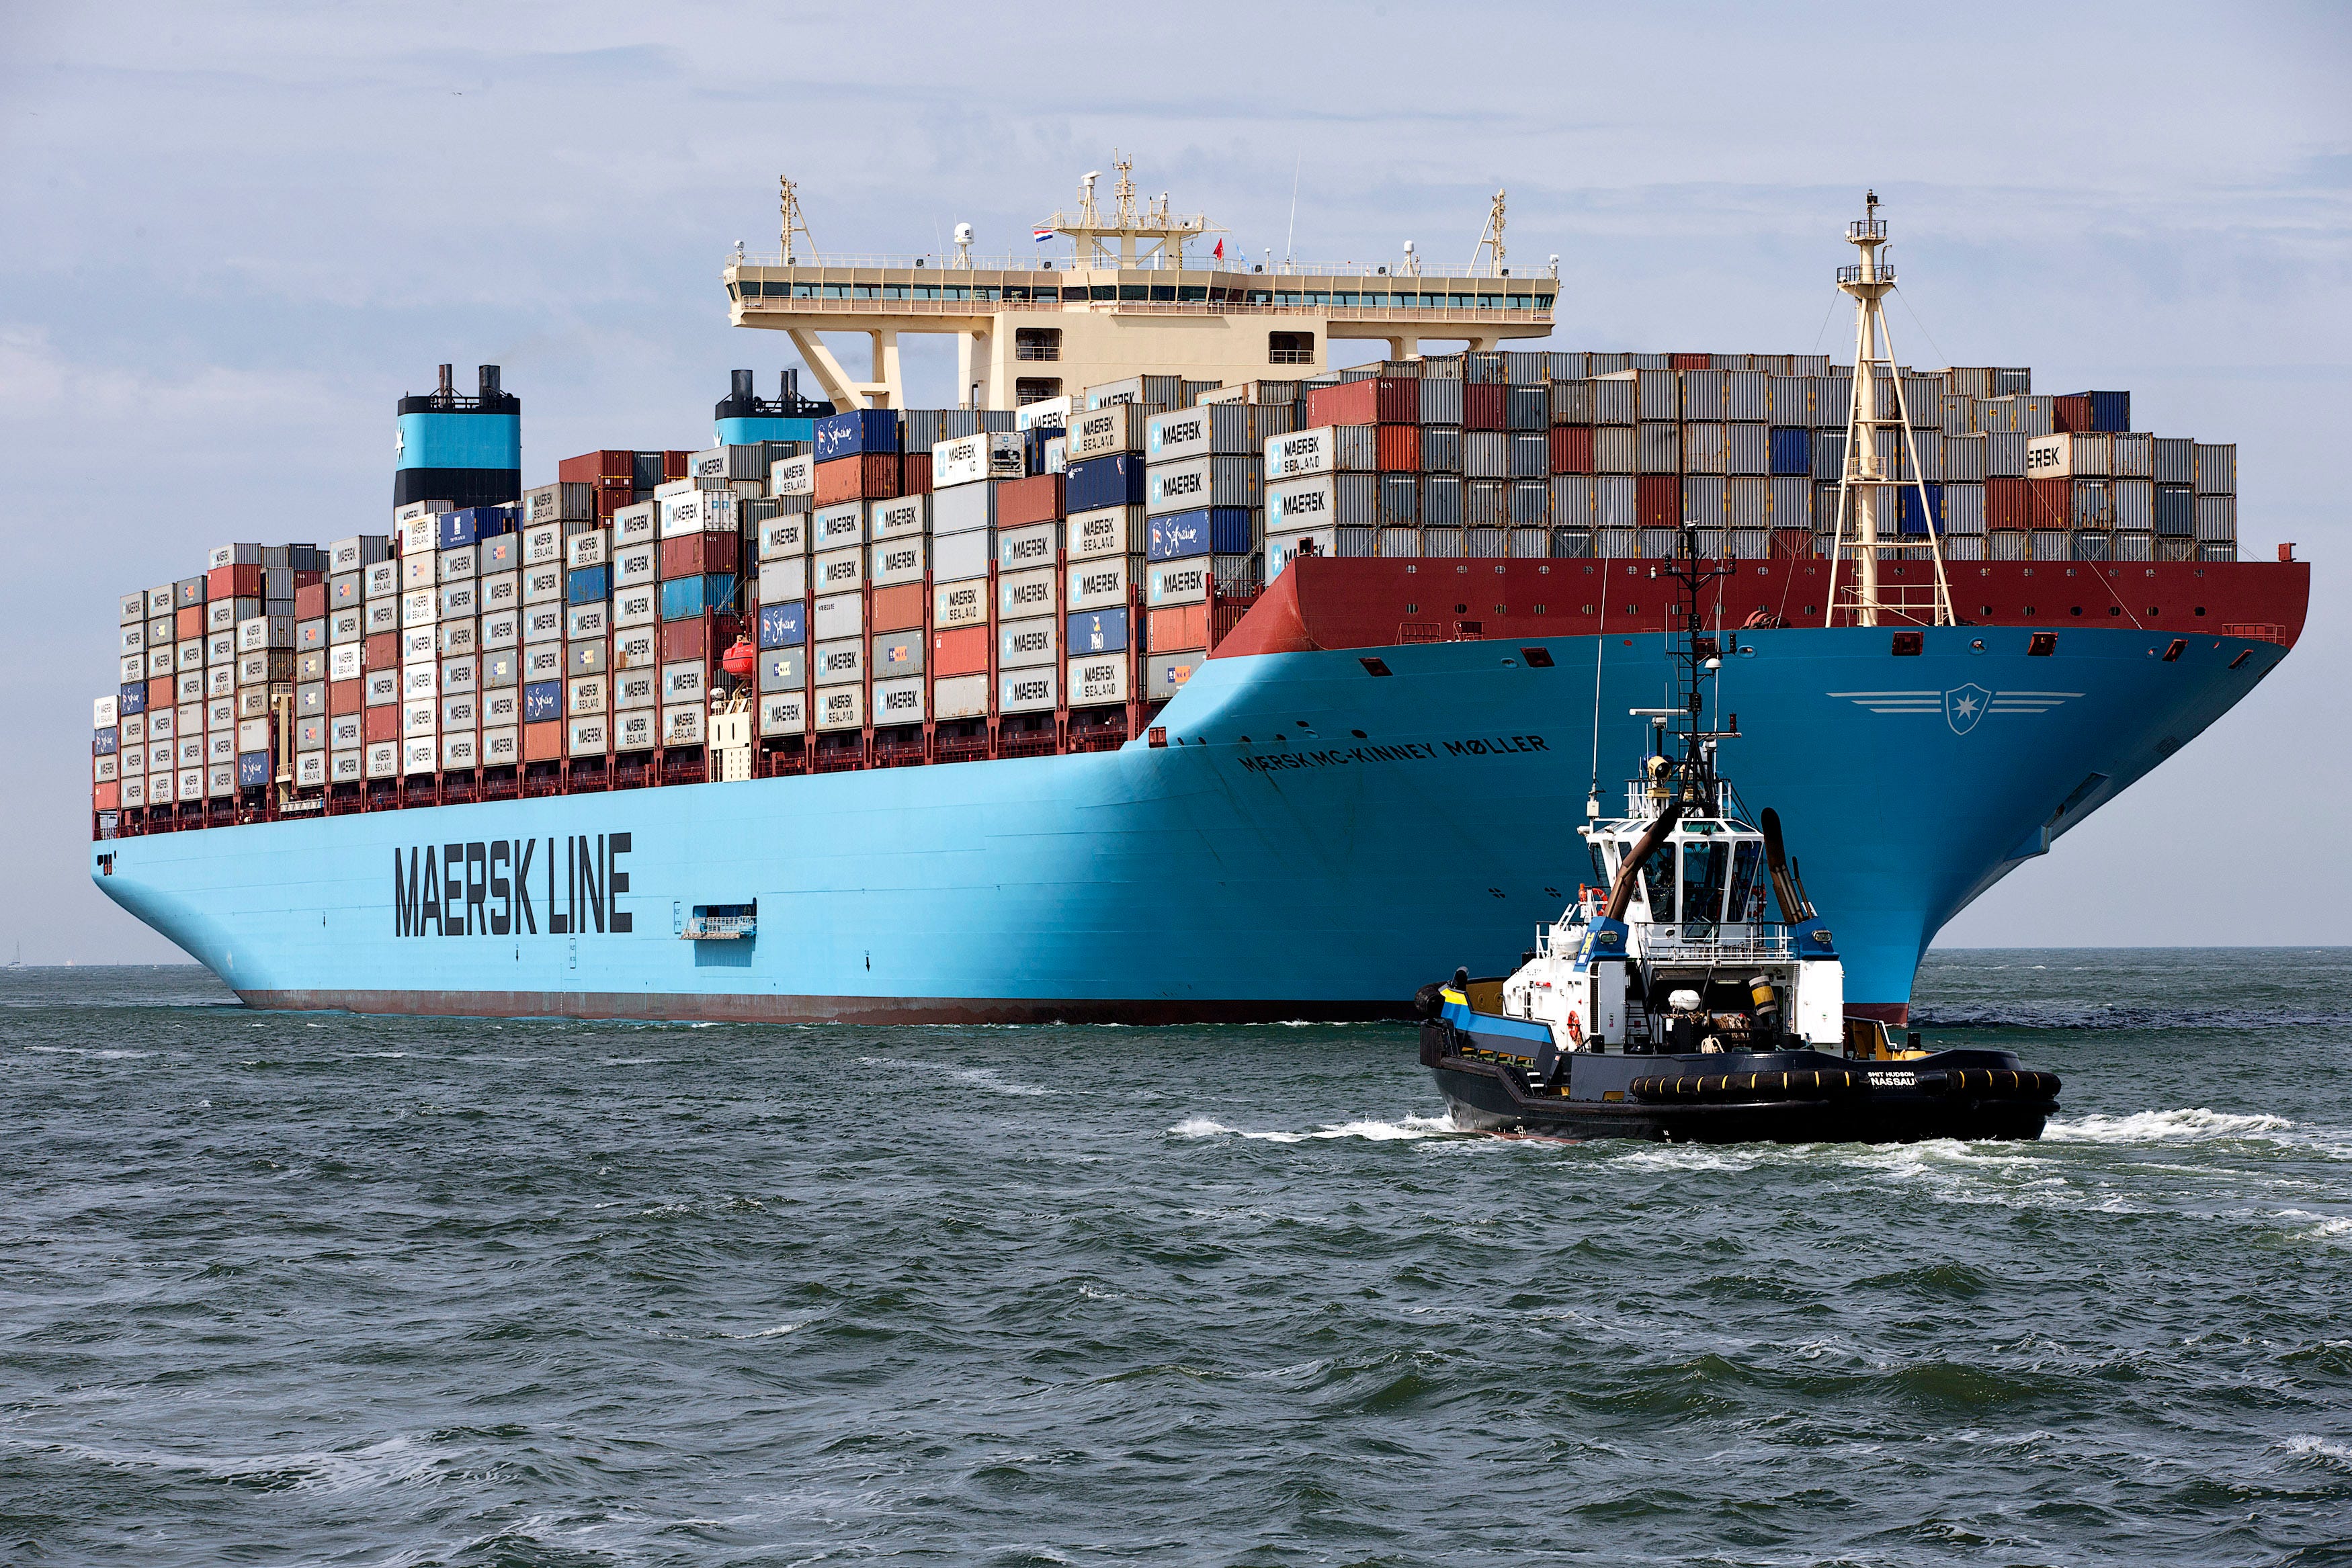 shipping-company-maersk-says-its-not-clear-why-iran-seized-cargo-ship.jpg